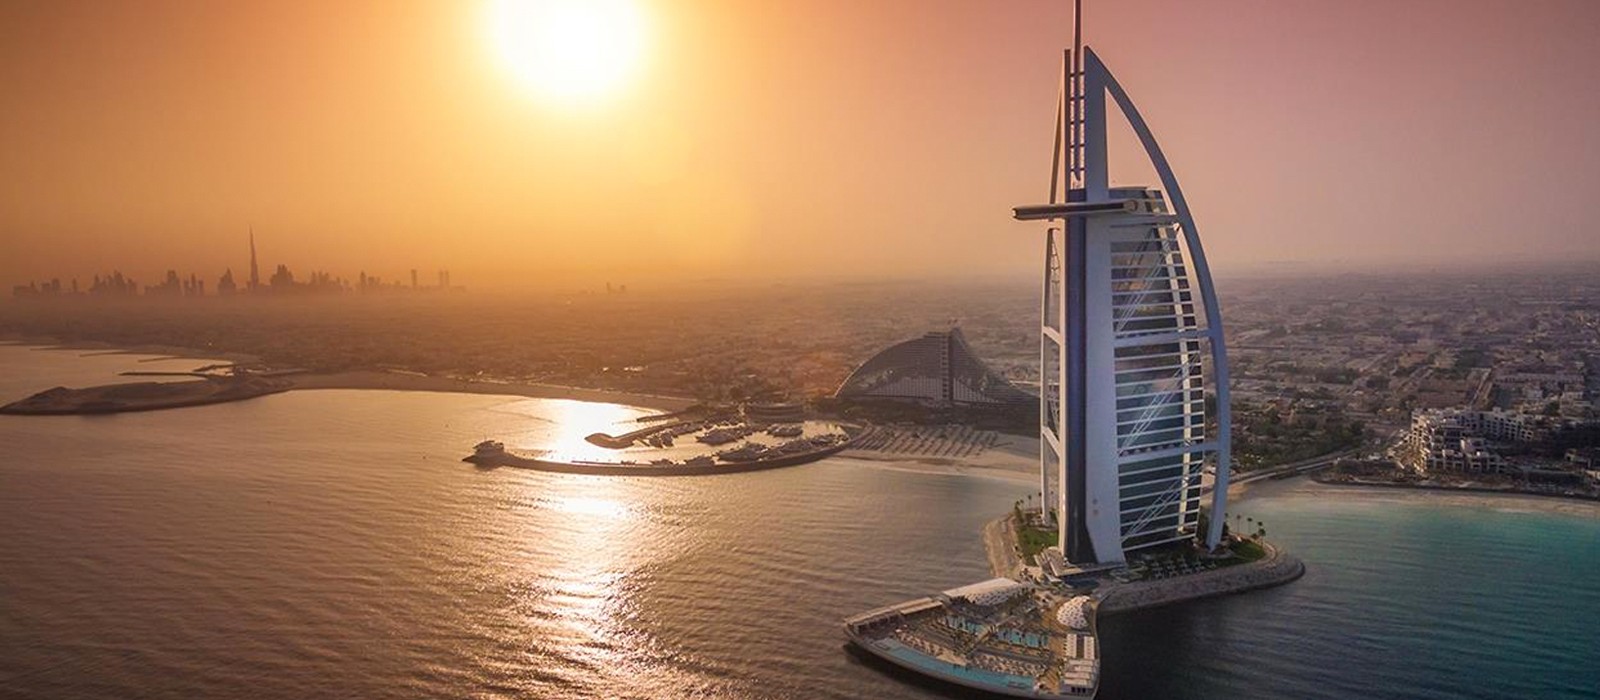 Dubai, promises a mix of luxury, culture, and stunning architecture